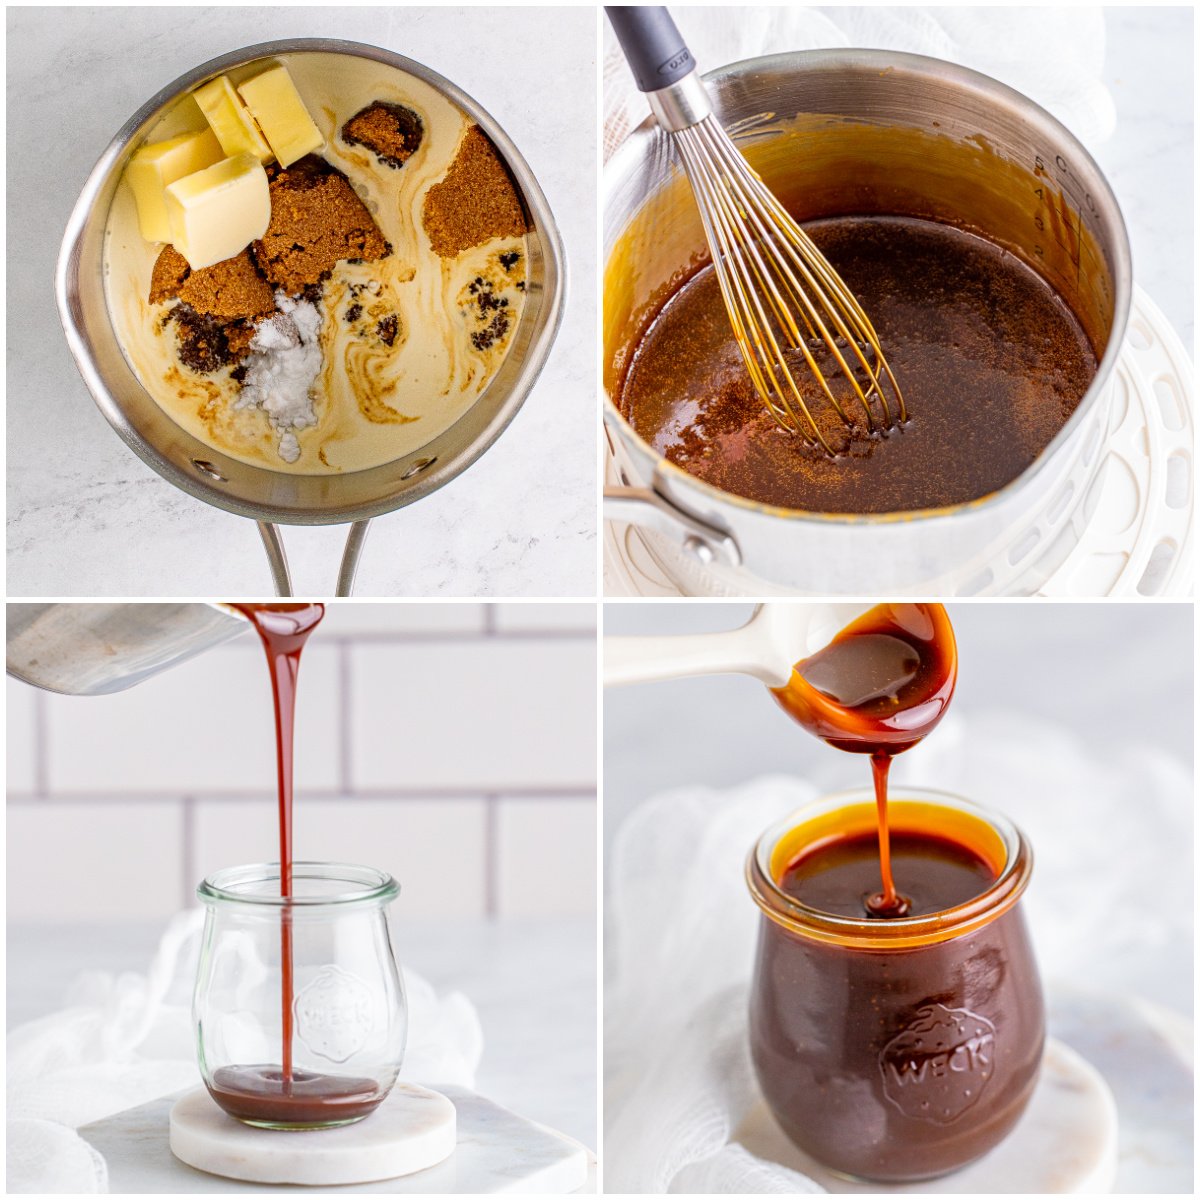 Step by step photos on how to make Butterscotch Sauce.